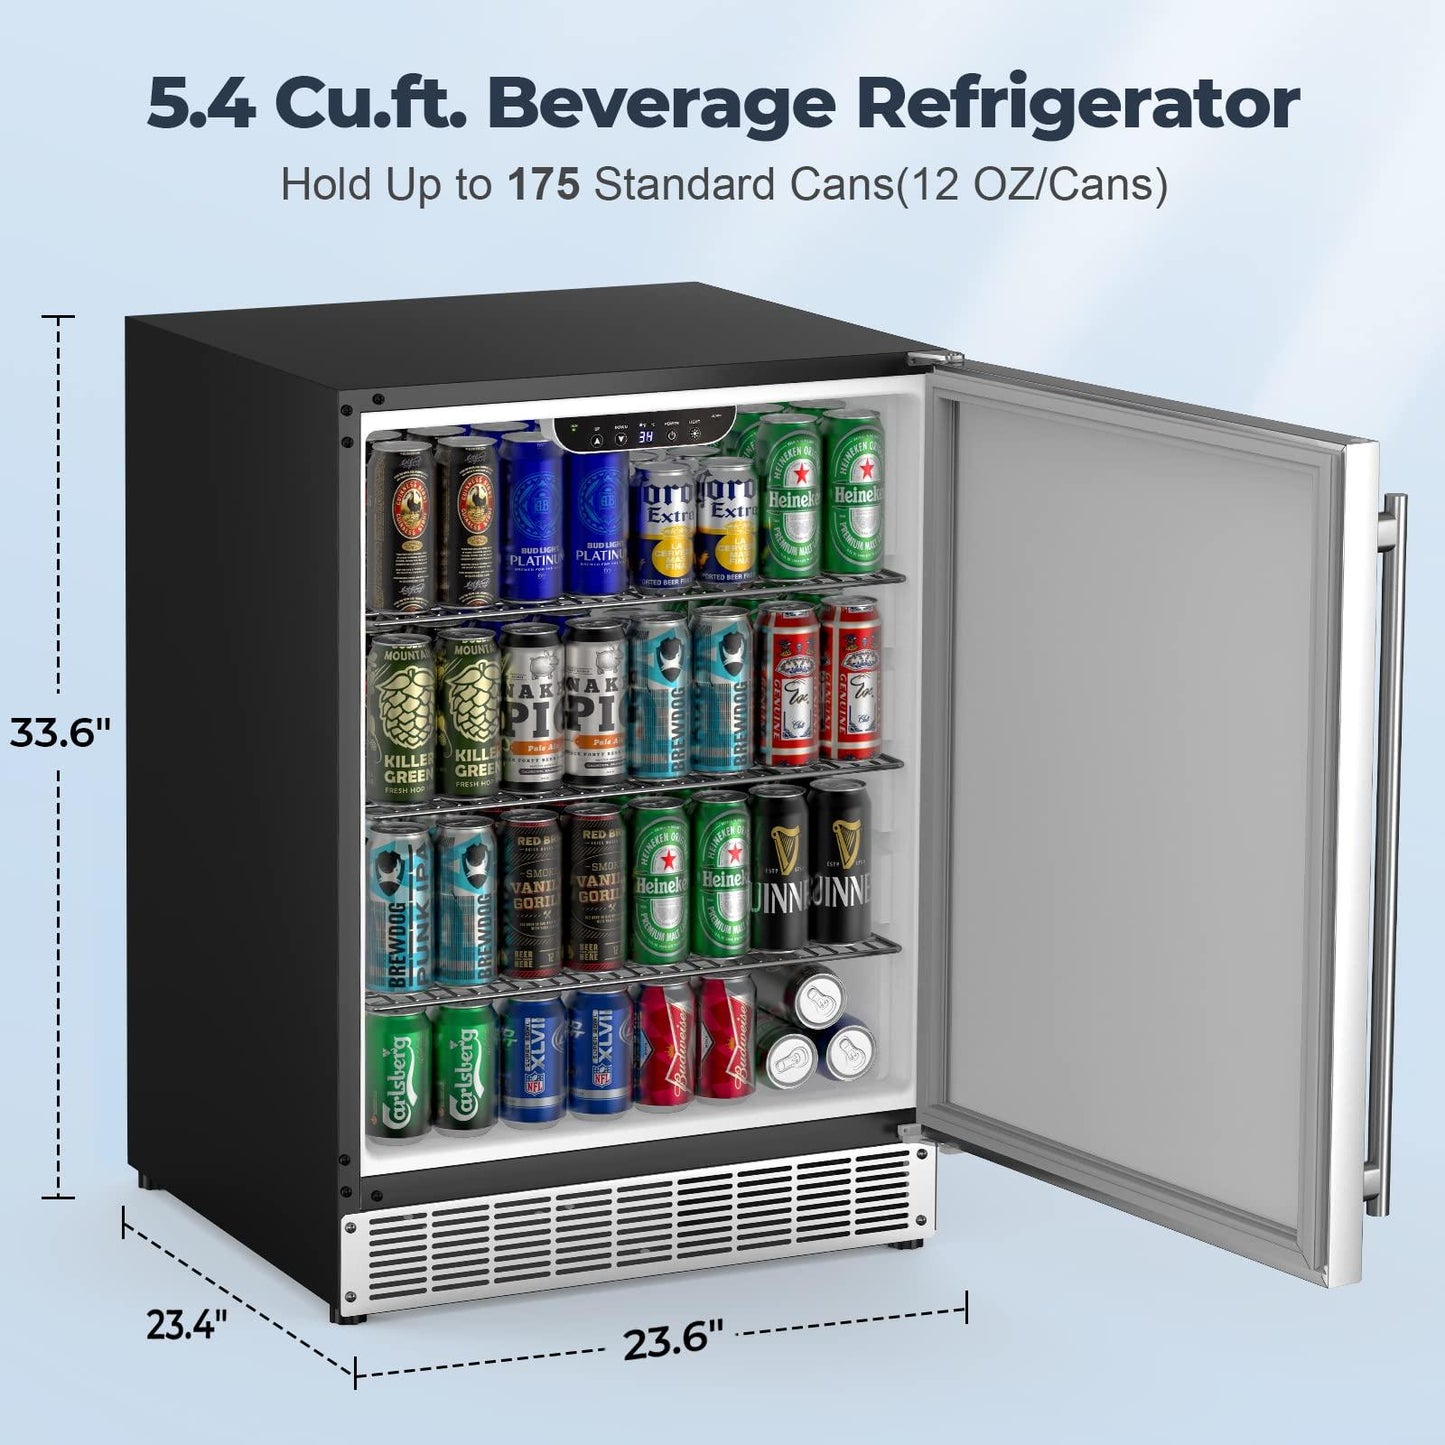 COTLIN 24 Inch Built-in Outdoor Refrigerator, 5.4 Cu.Ft Undercounter Beverage Fridge, 175 Cans Freestanding Stainless Steel Refrigerator for Residential Home Bar Commercial Use, ETL - CookCave